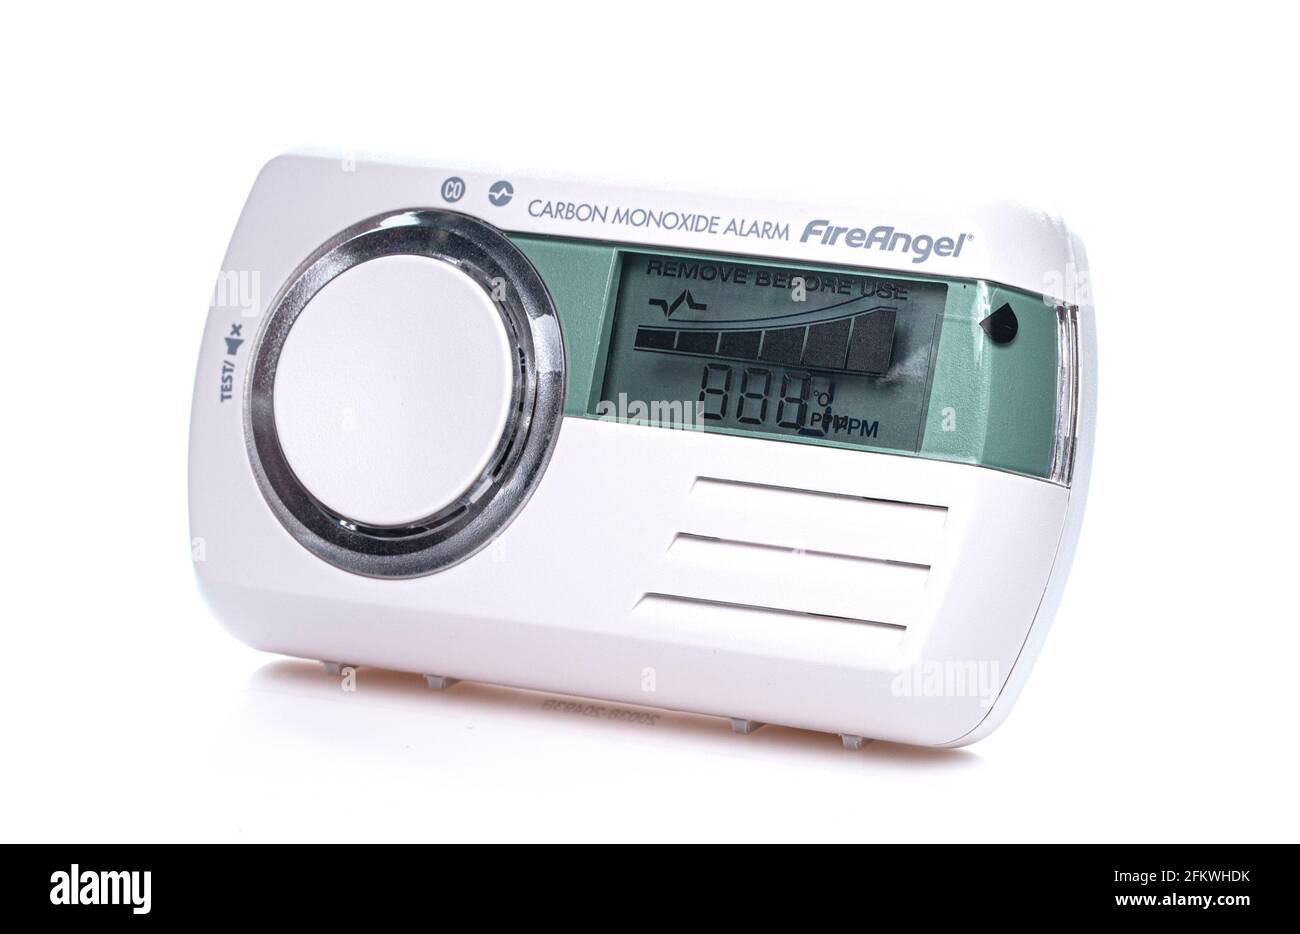 SWINDON, UK - MAY 3, 2021: Fire Angel CO Carbon Monoxide Alarm on a White Background Stock Photo